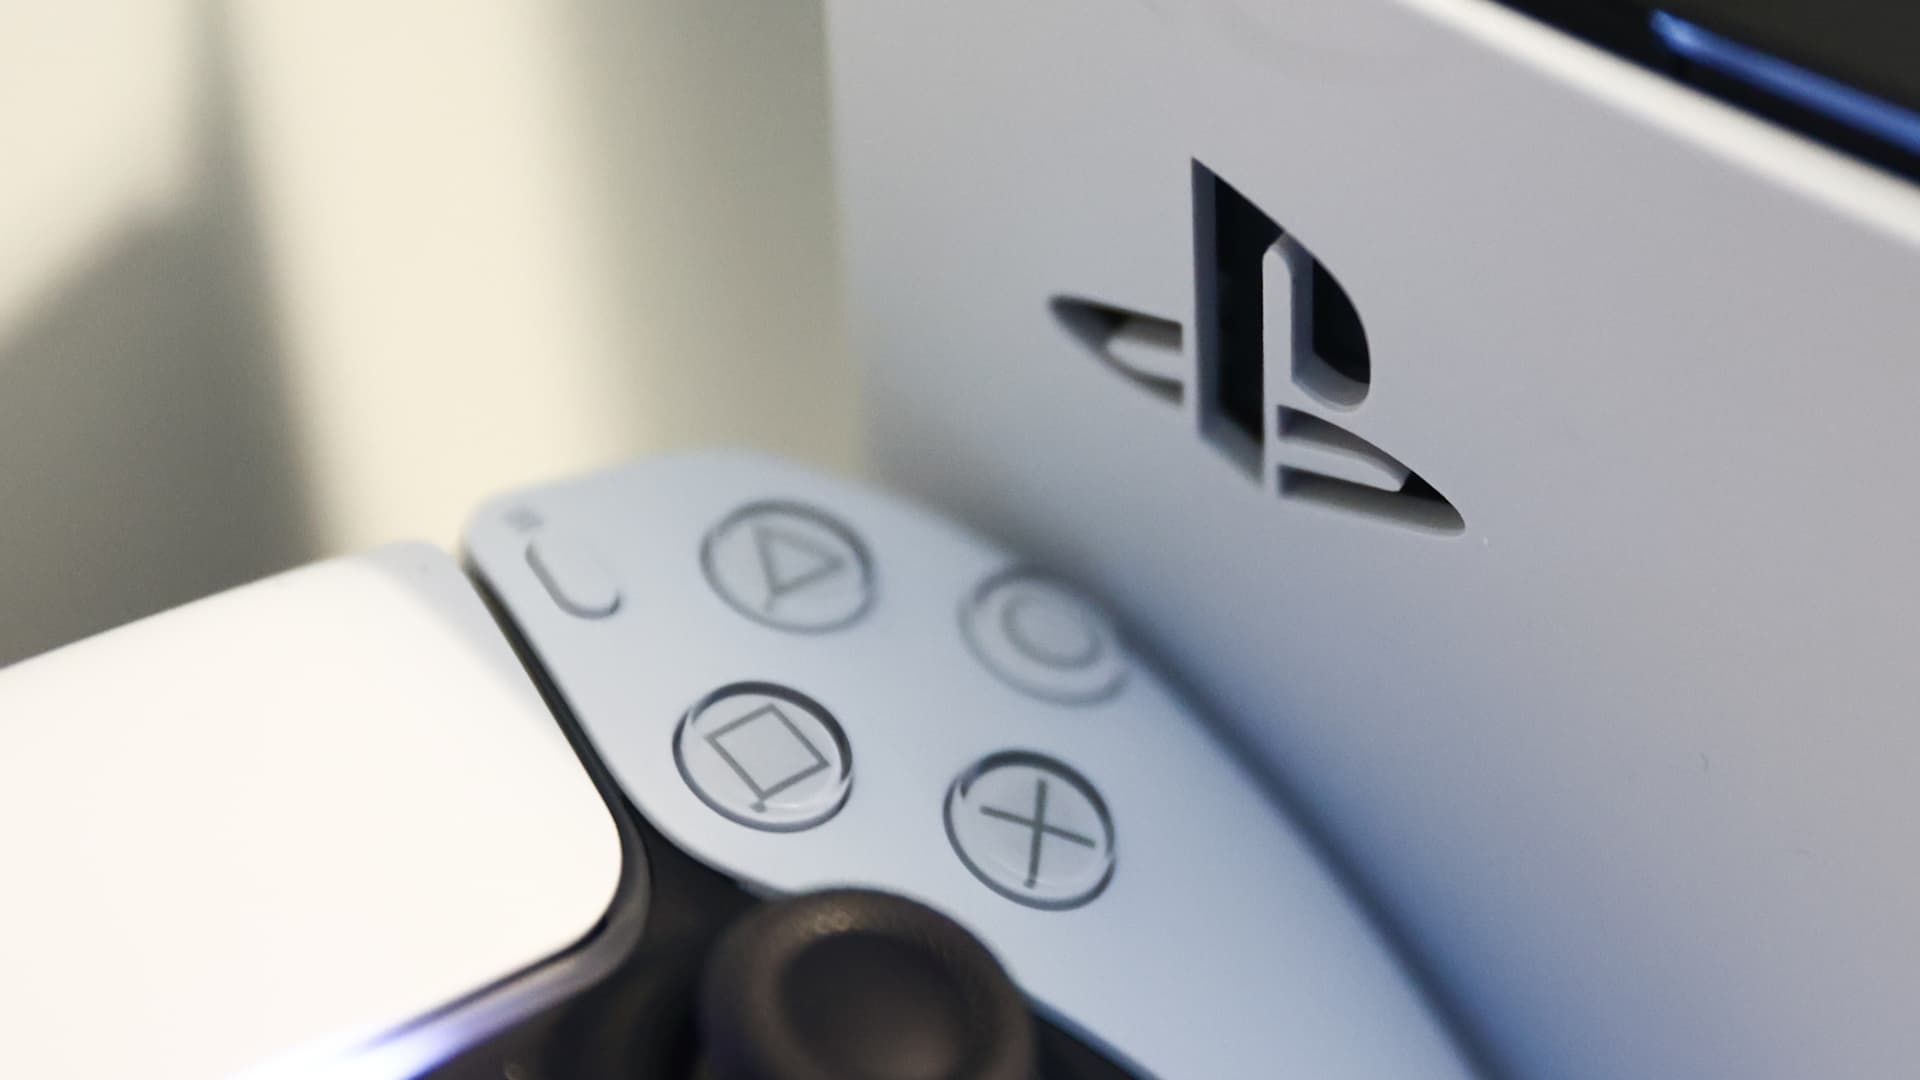 Sony is making a mettlesome wager on an African gaming startup to steal PlayStation’s reach in the continent